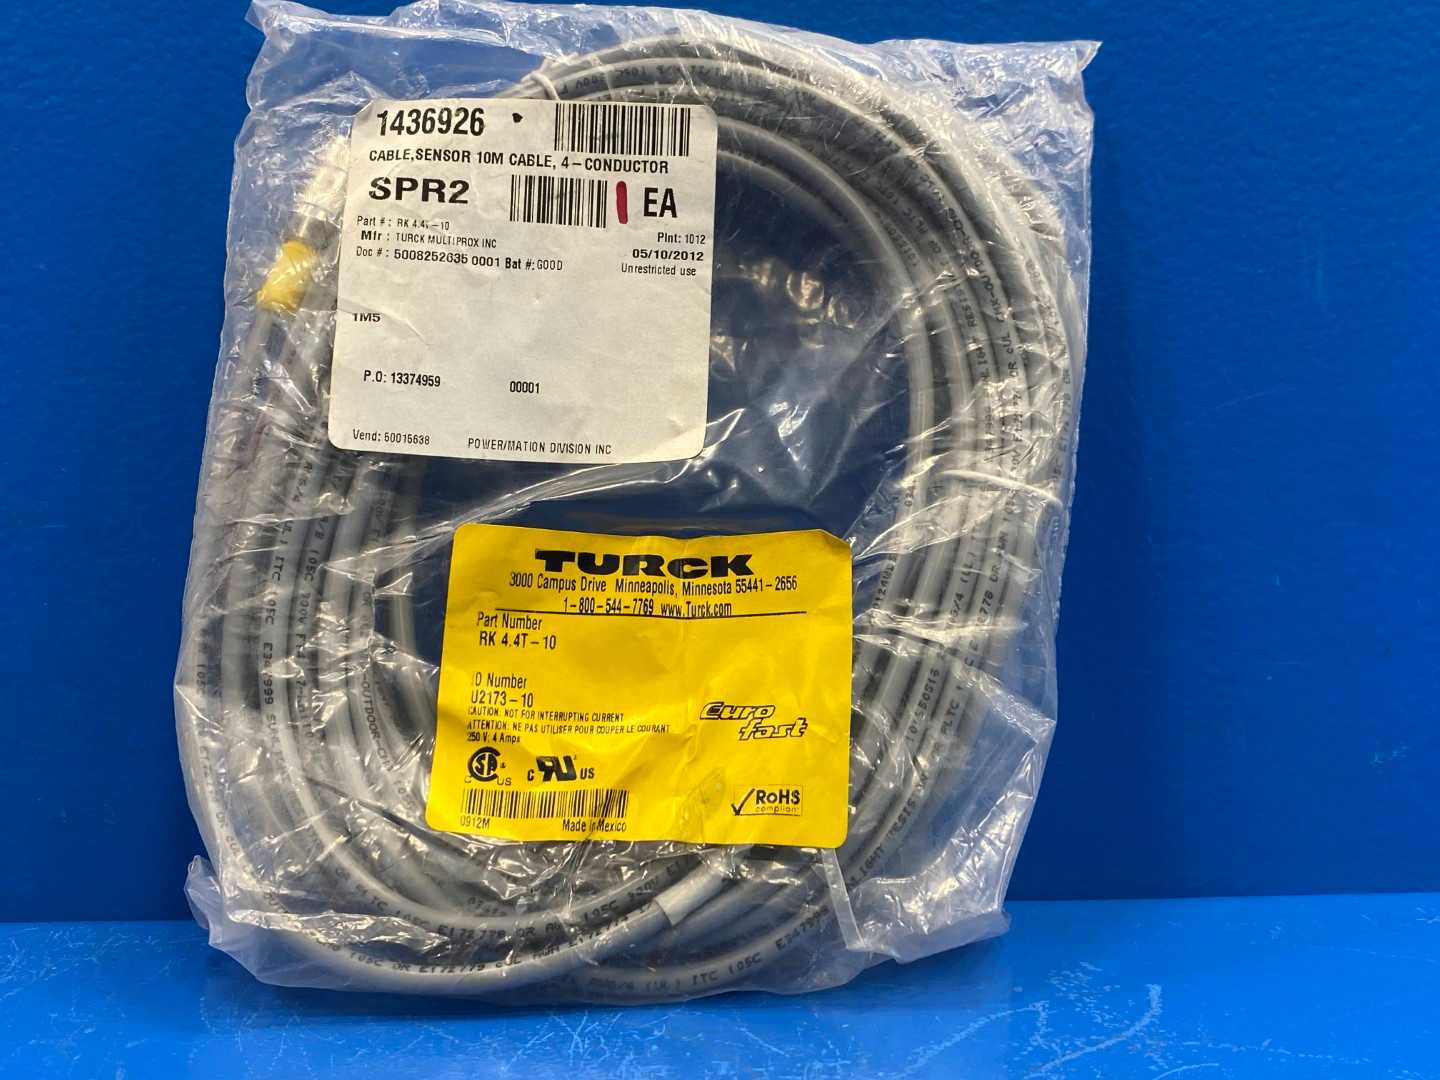 Turck Actuator and Sensor Cordset  Connection Cable RK 4.4T-10 10m Cable